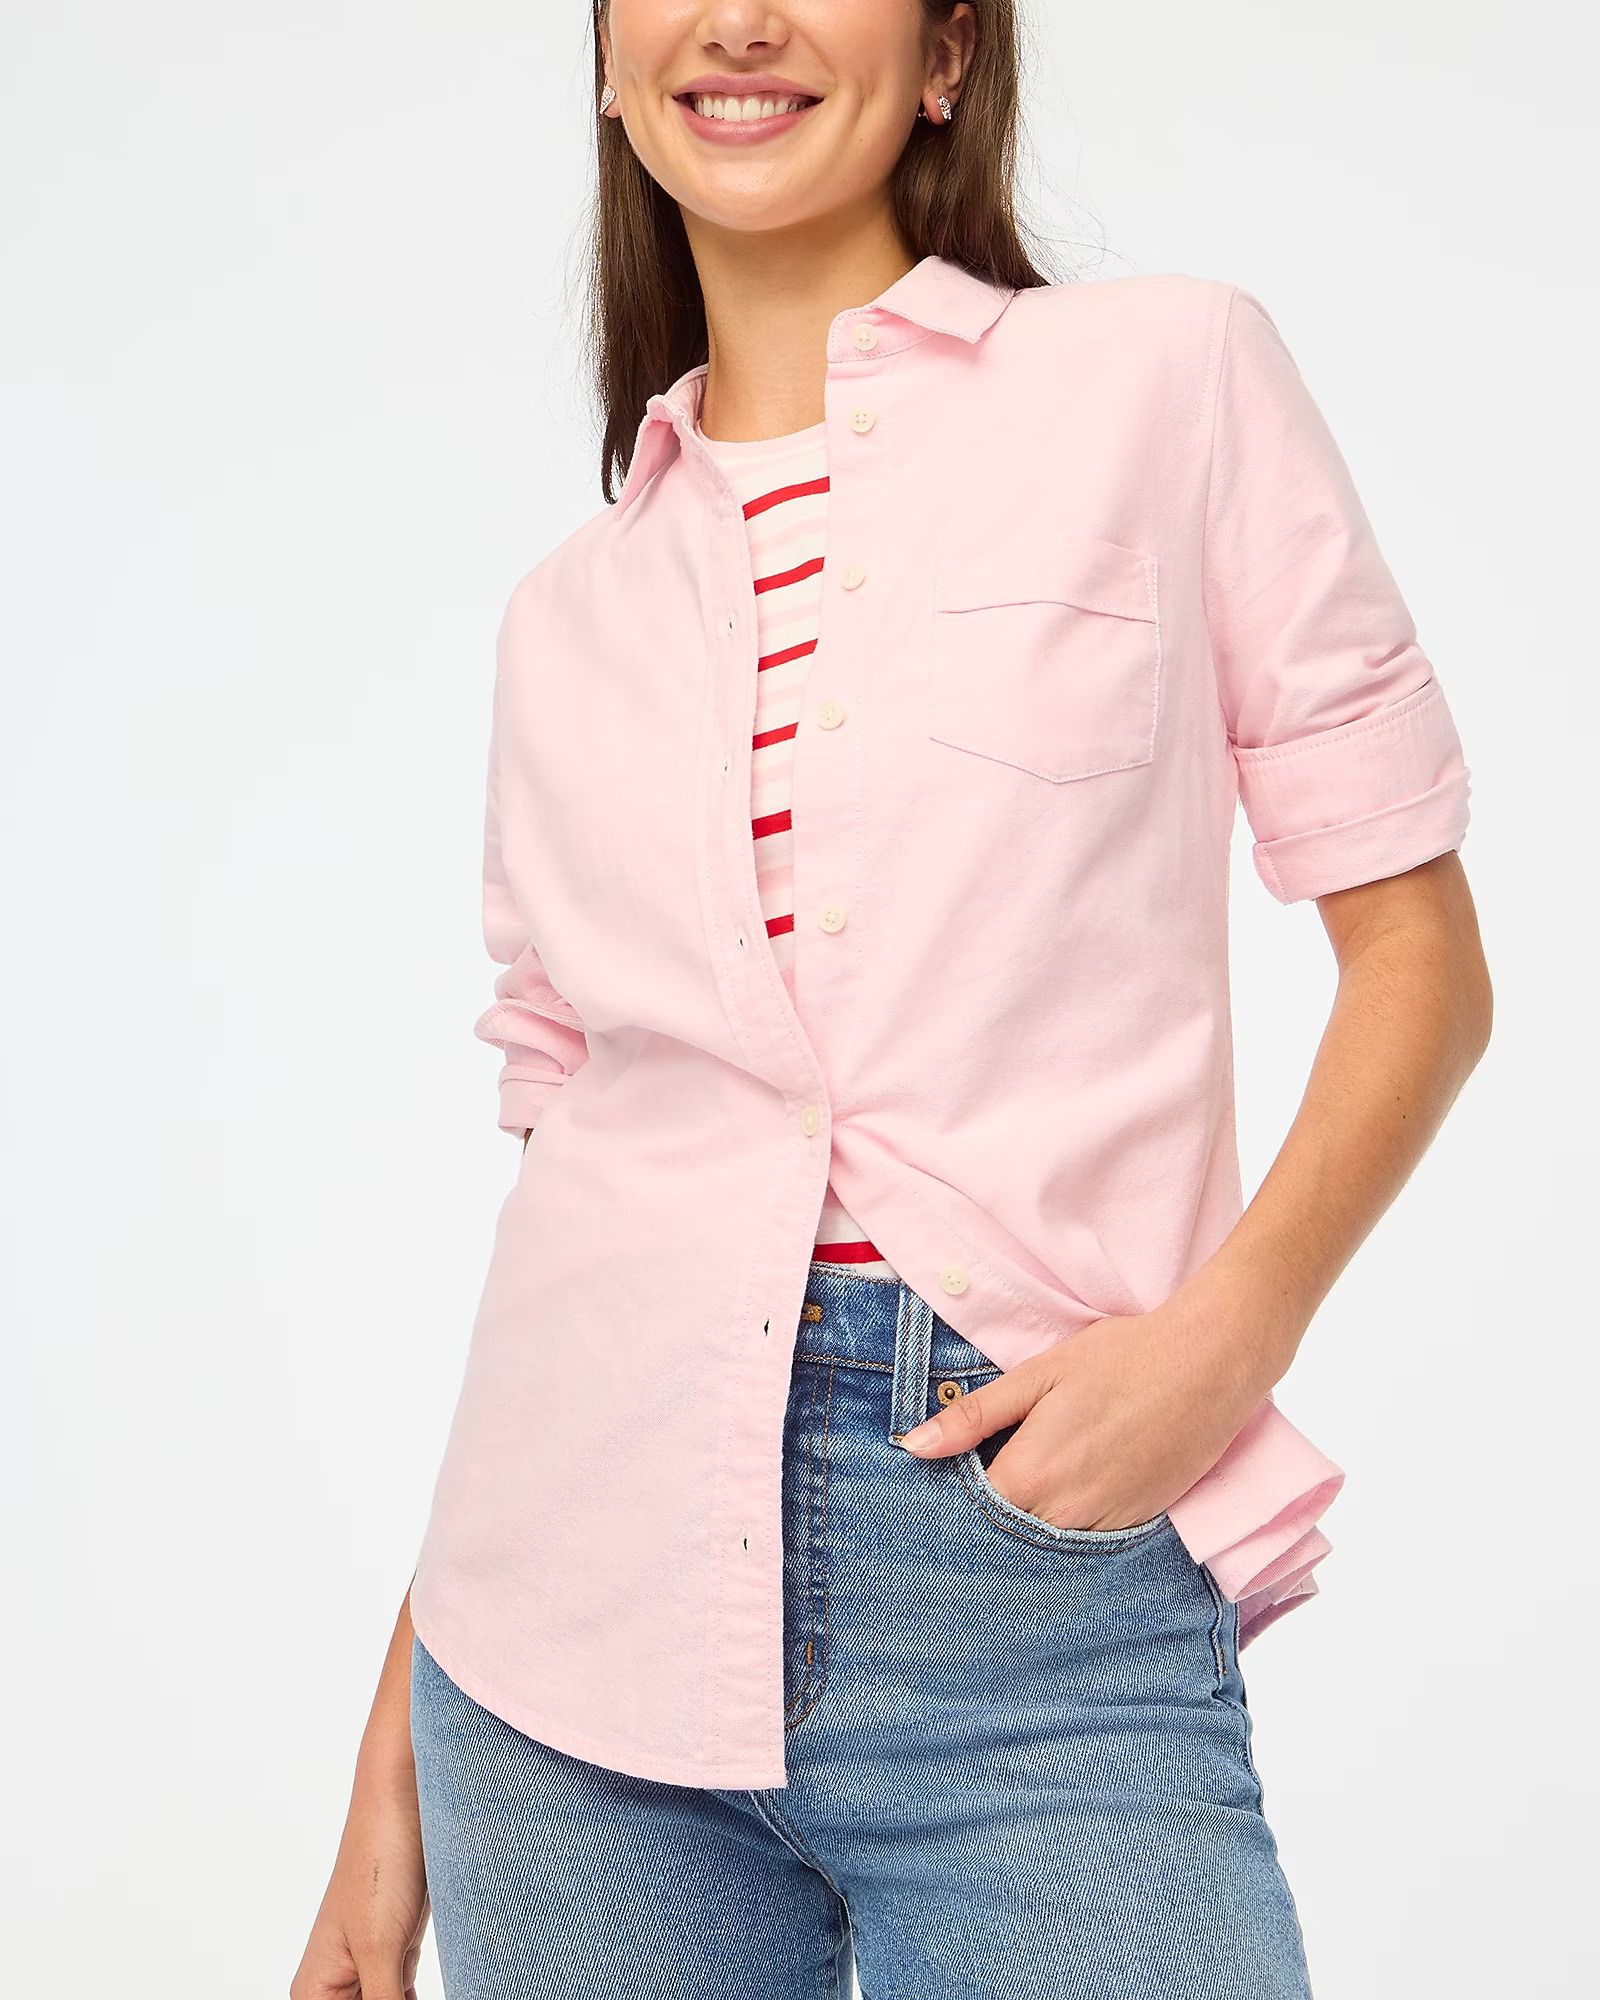 Button-up oxford shirt in signature fit | J.Crew Factory